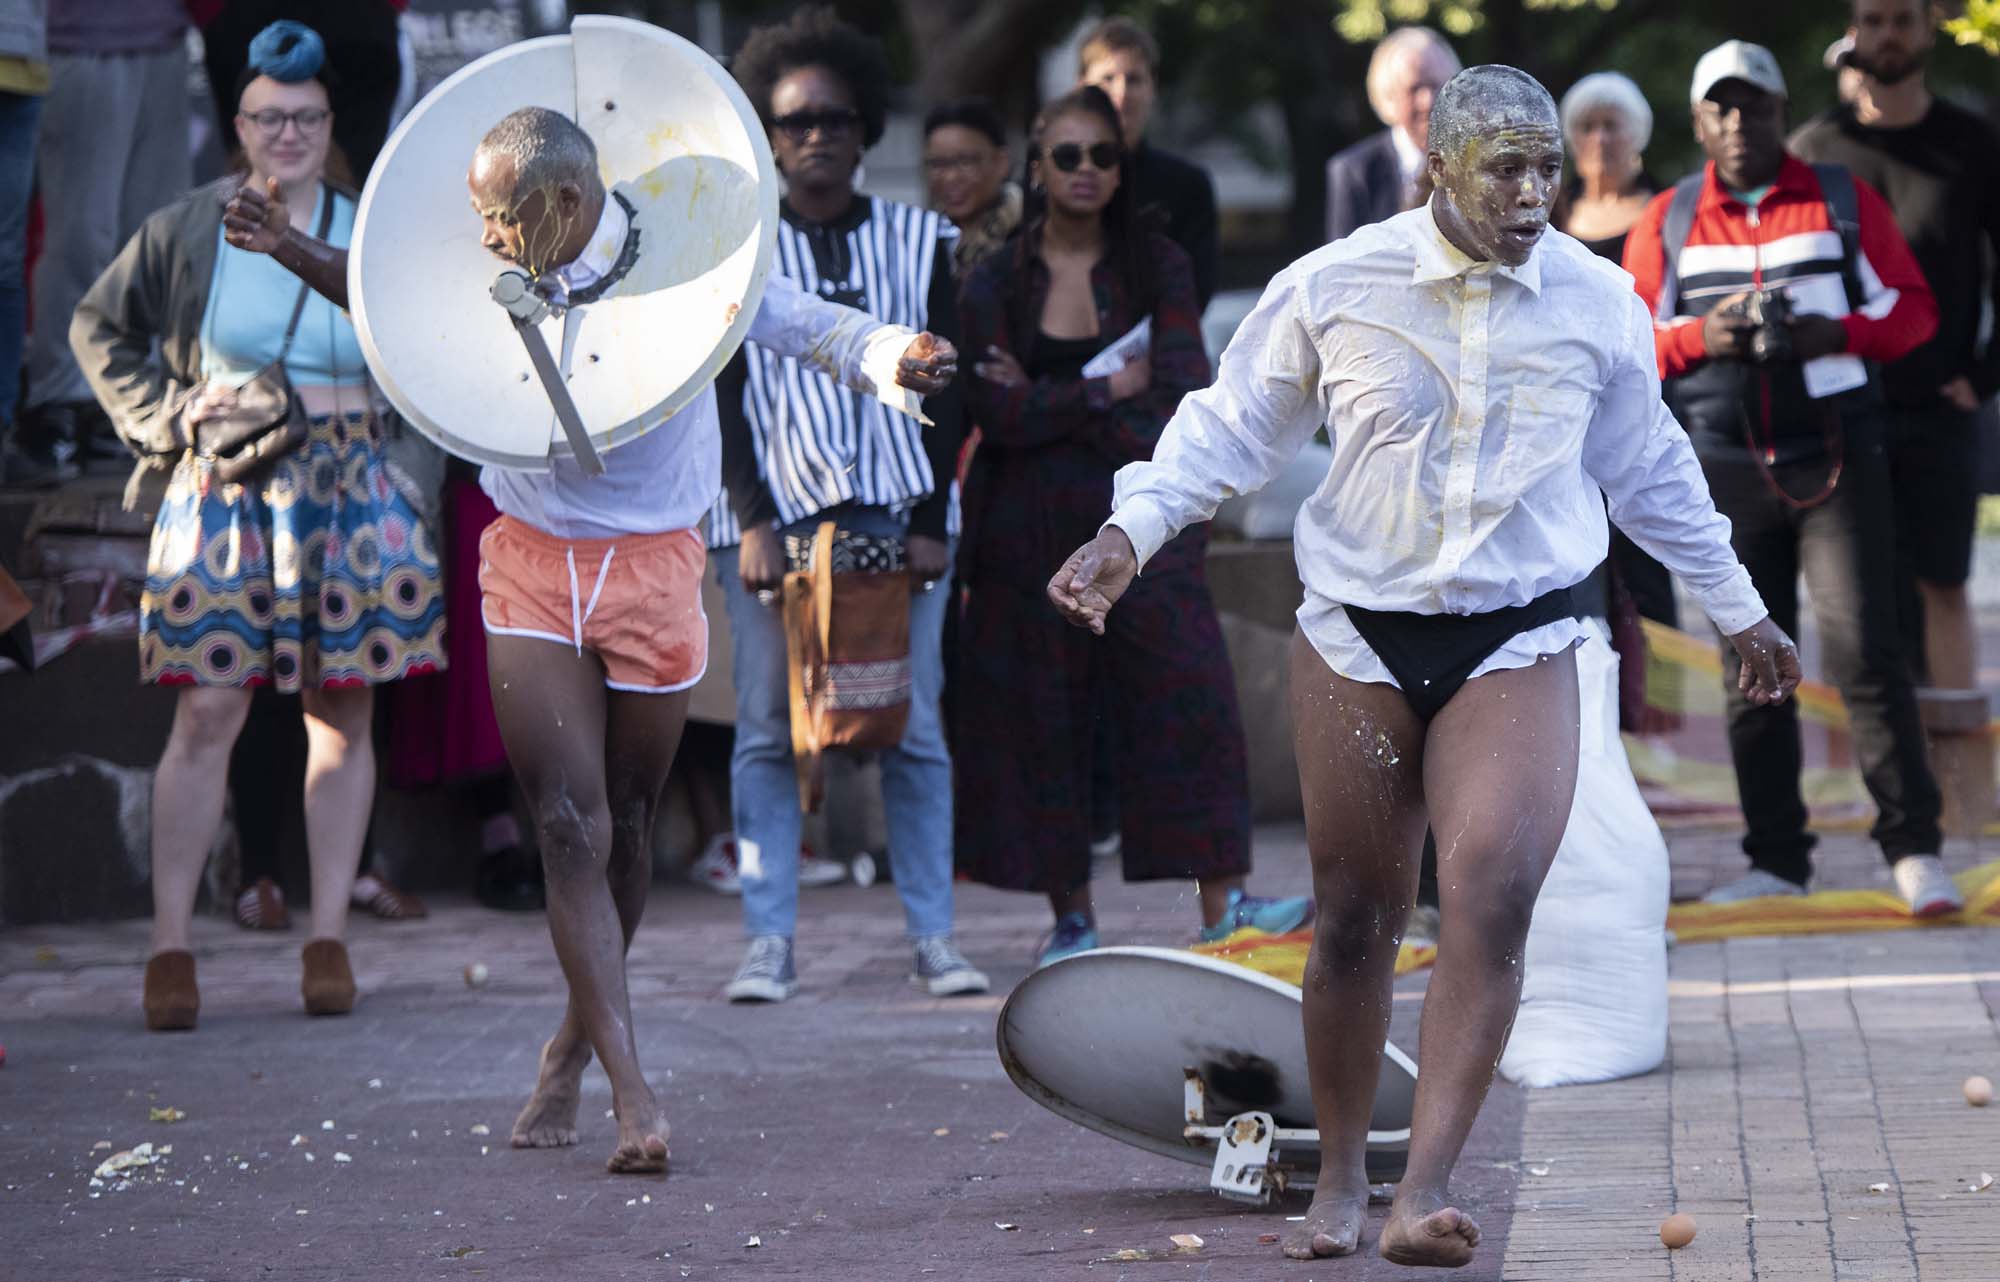 <i>The Dish</i> was performed by Oupa Sibeko and Thulani Chauke at the 12th instalment of Infecting the City, hosted in November in partnership with the Institute for Creative Arts.